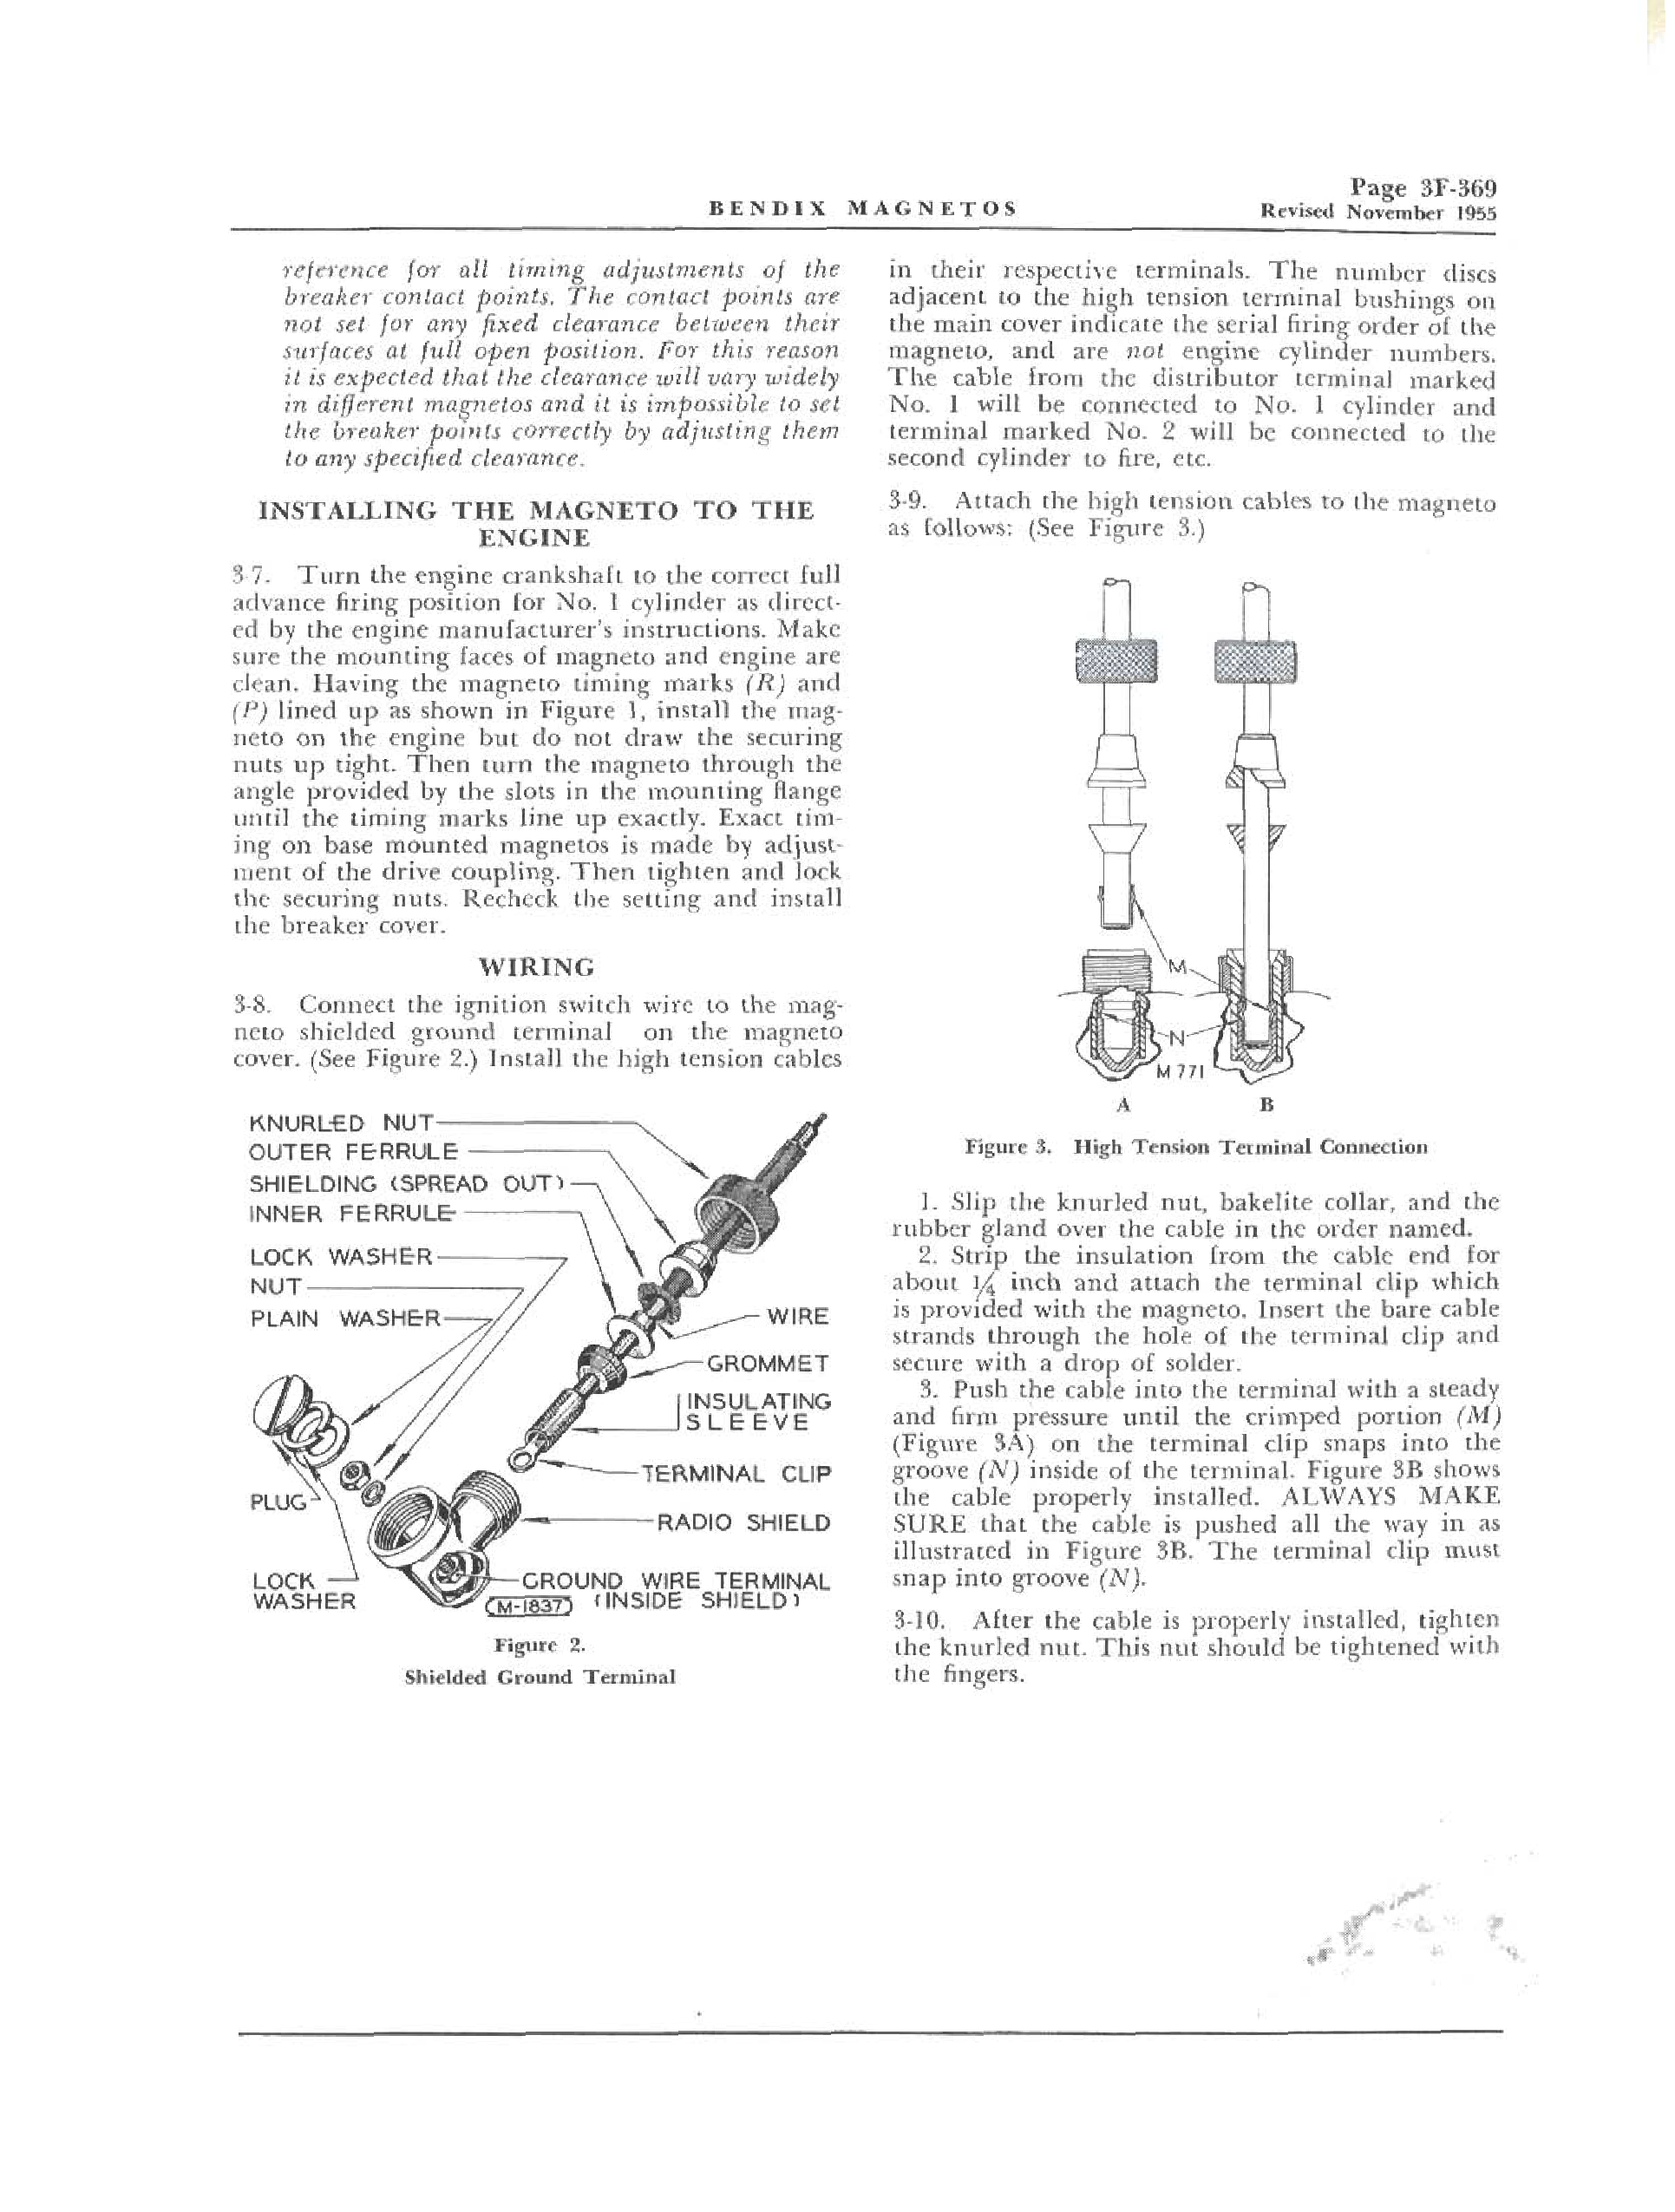 Sample page 5 from AirCorps Library document: Service Instructions for Bendix Aircraft Magnetos